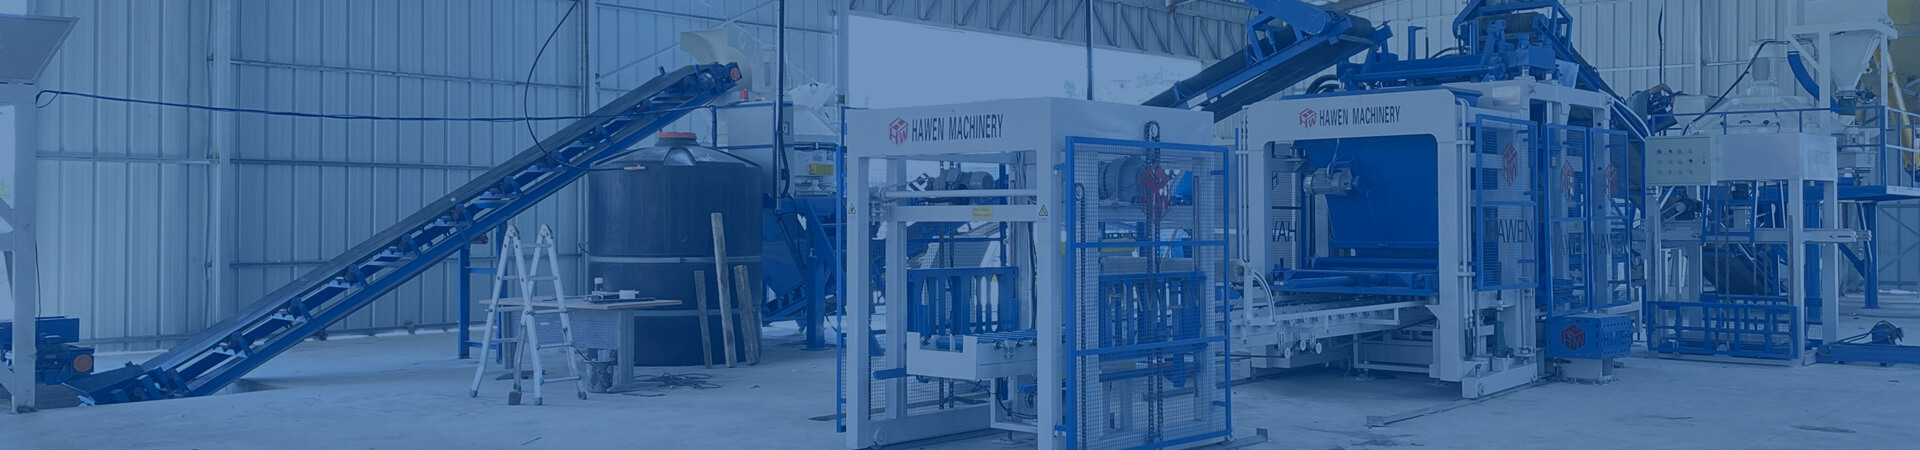 Hawen Machinery Is A Backbone Manufacturer of Concrete Block Making Machines And Molds In China.